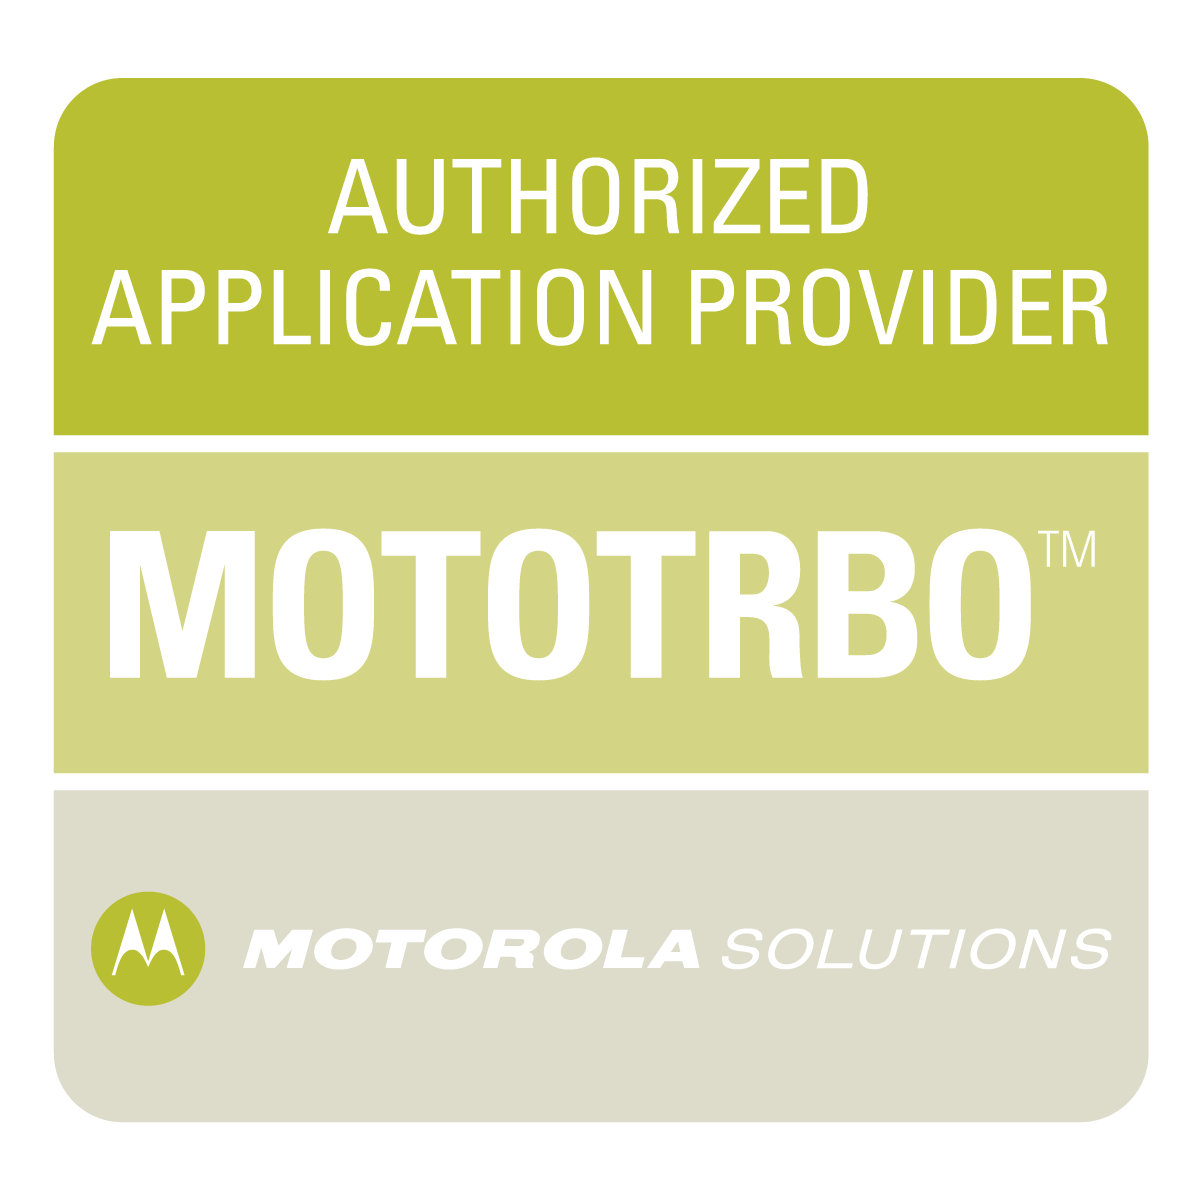 Authorized Application Provider for MotoTrbo